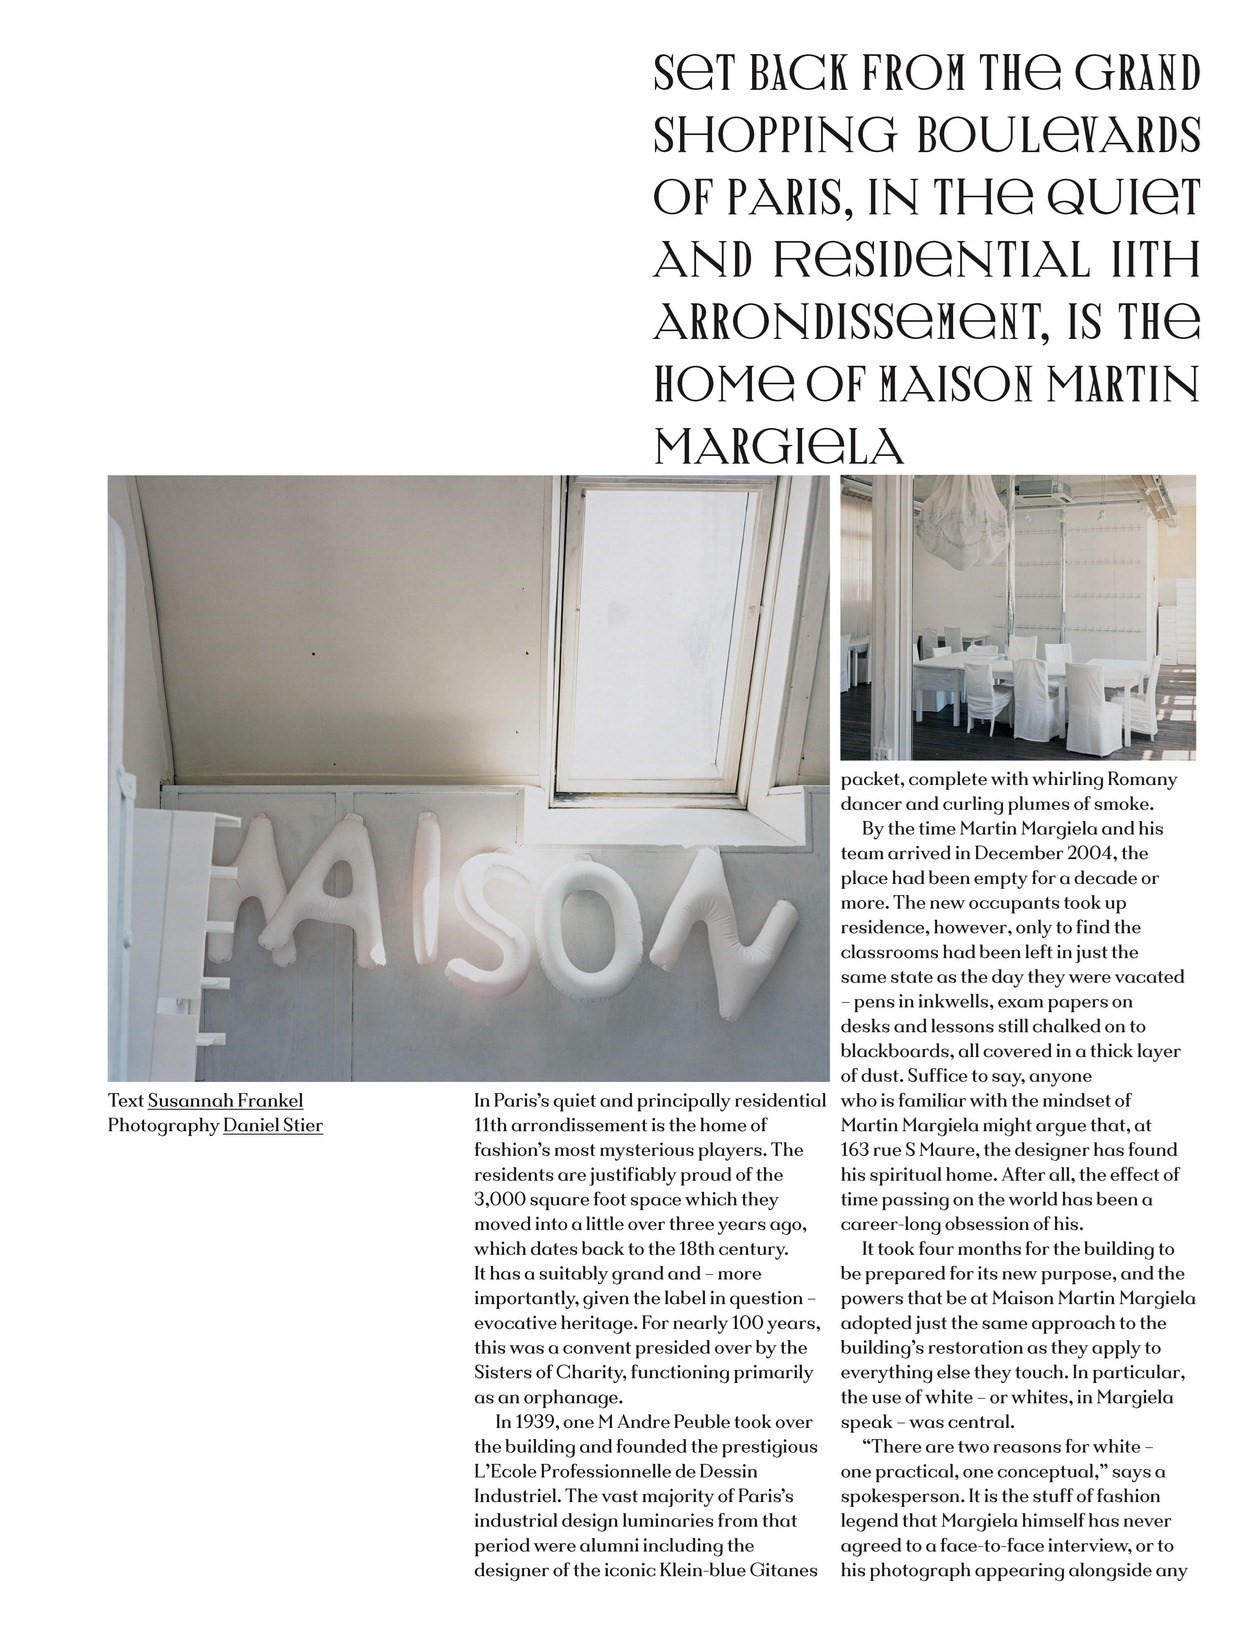 From the Archive: Inside Martin Margiela's All-White Maison | AnOther